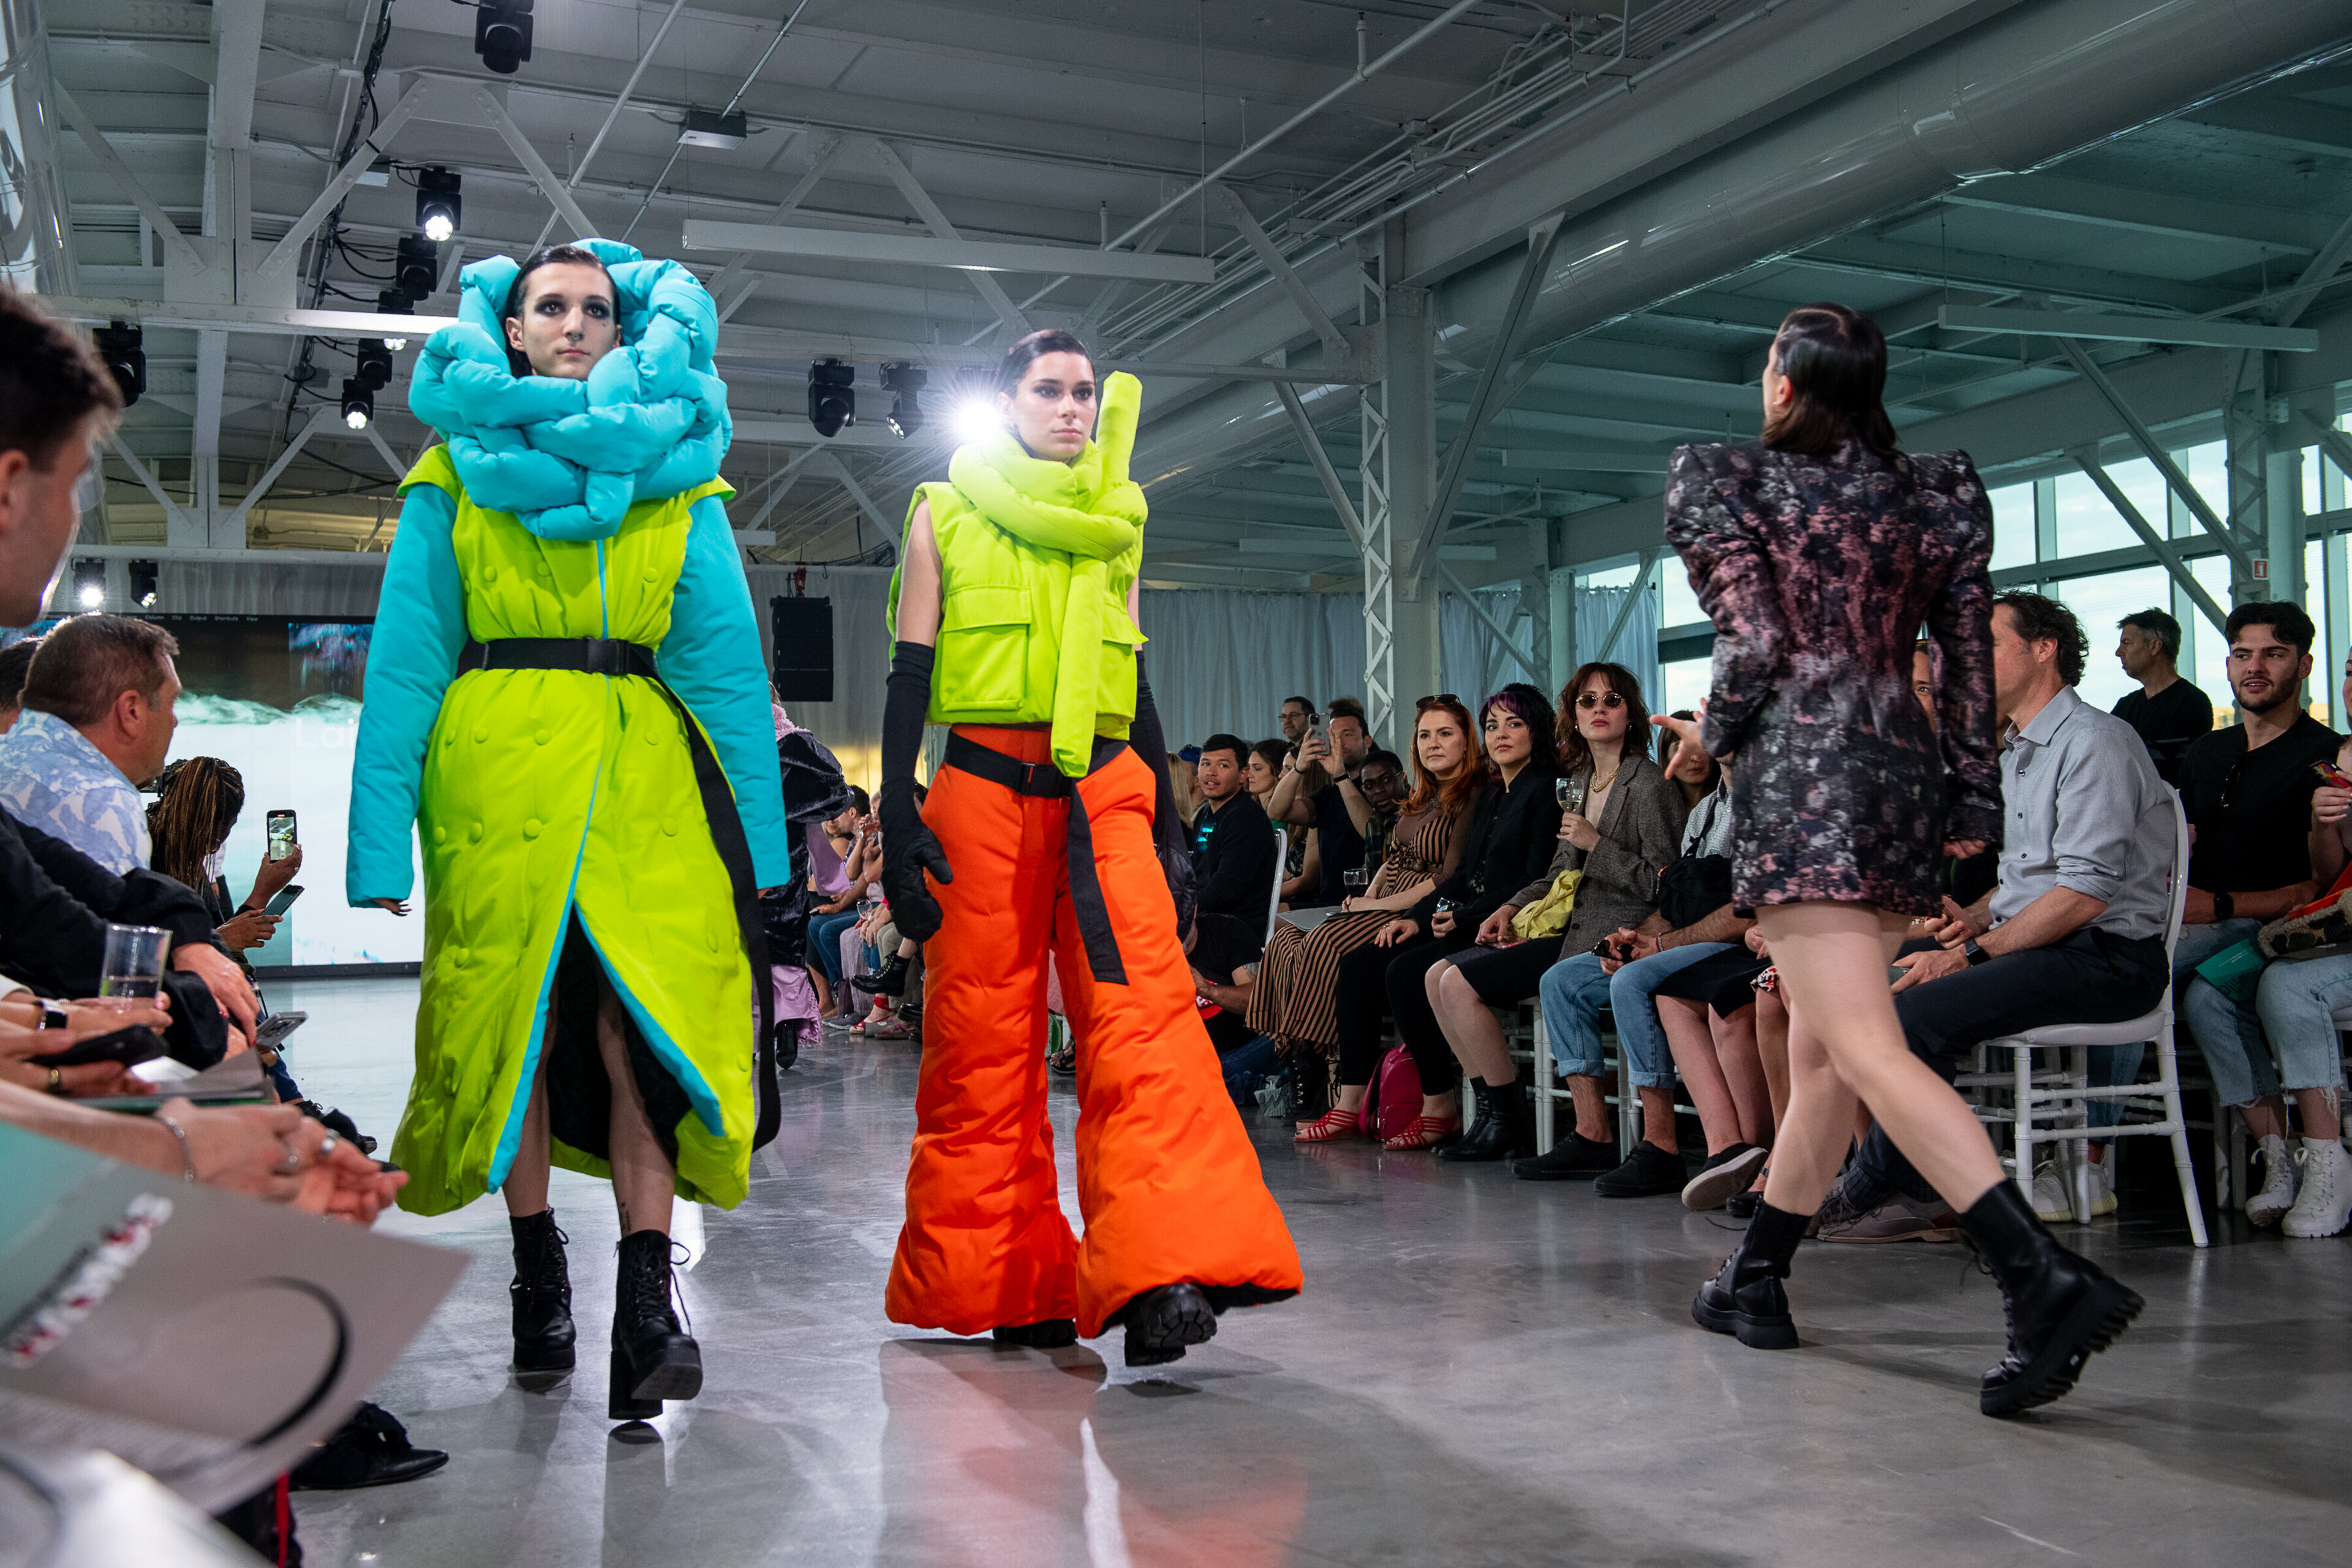 Models display bold avant-garde outfits on a runway, with an audience of spectators in the background.